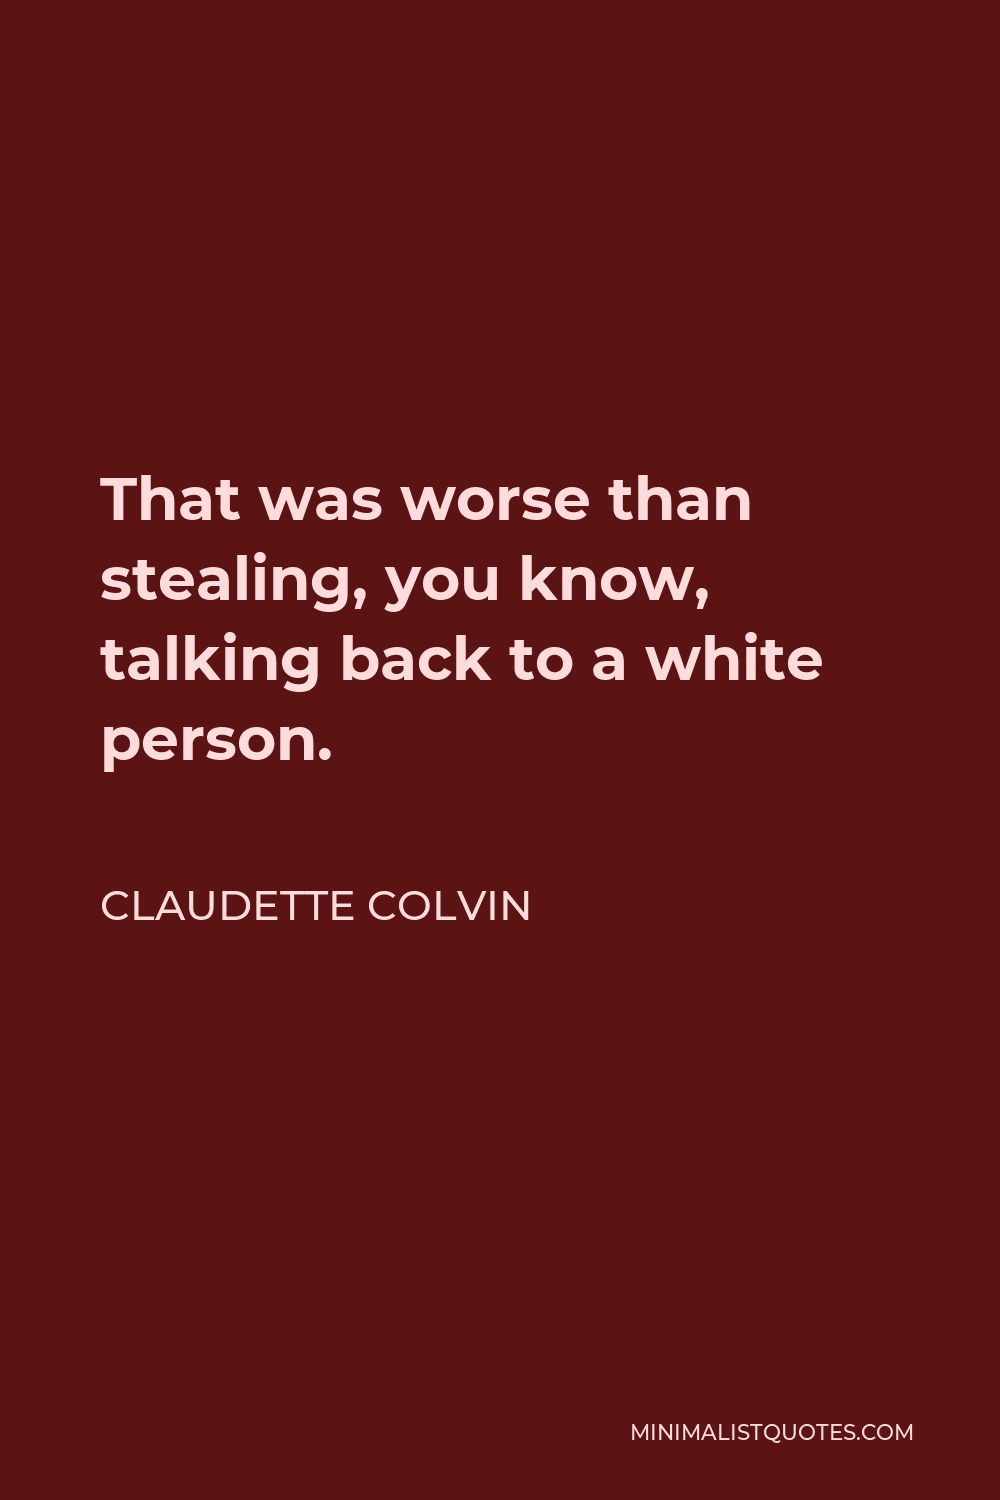 Claudette Colvin Quote - That was worse than stealing, you know, talking back to a white person.